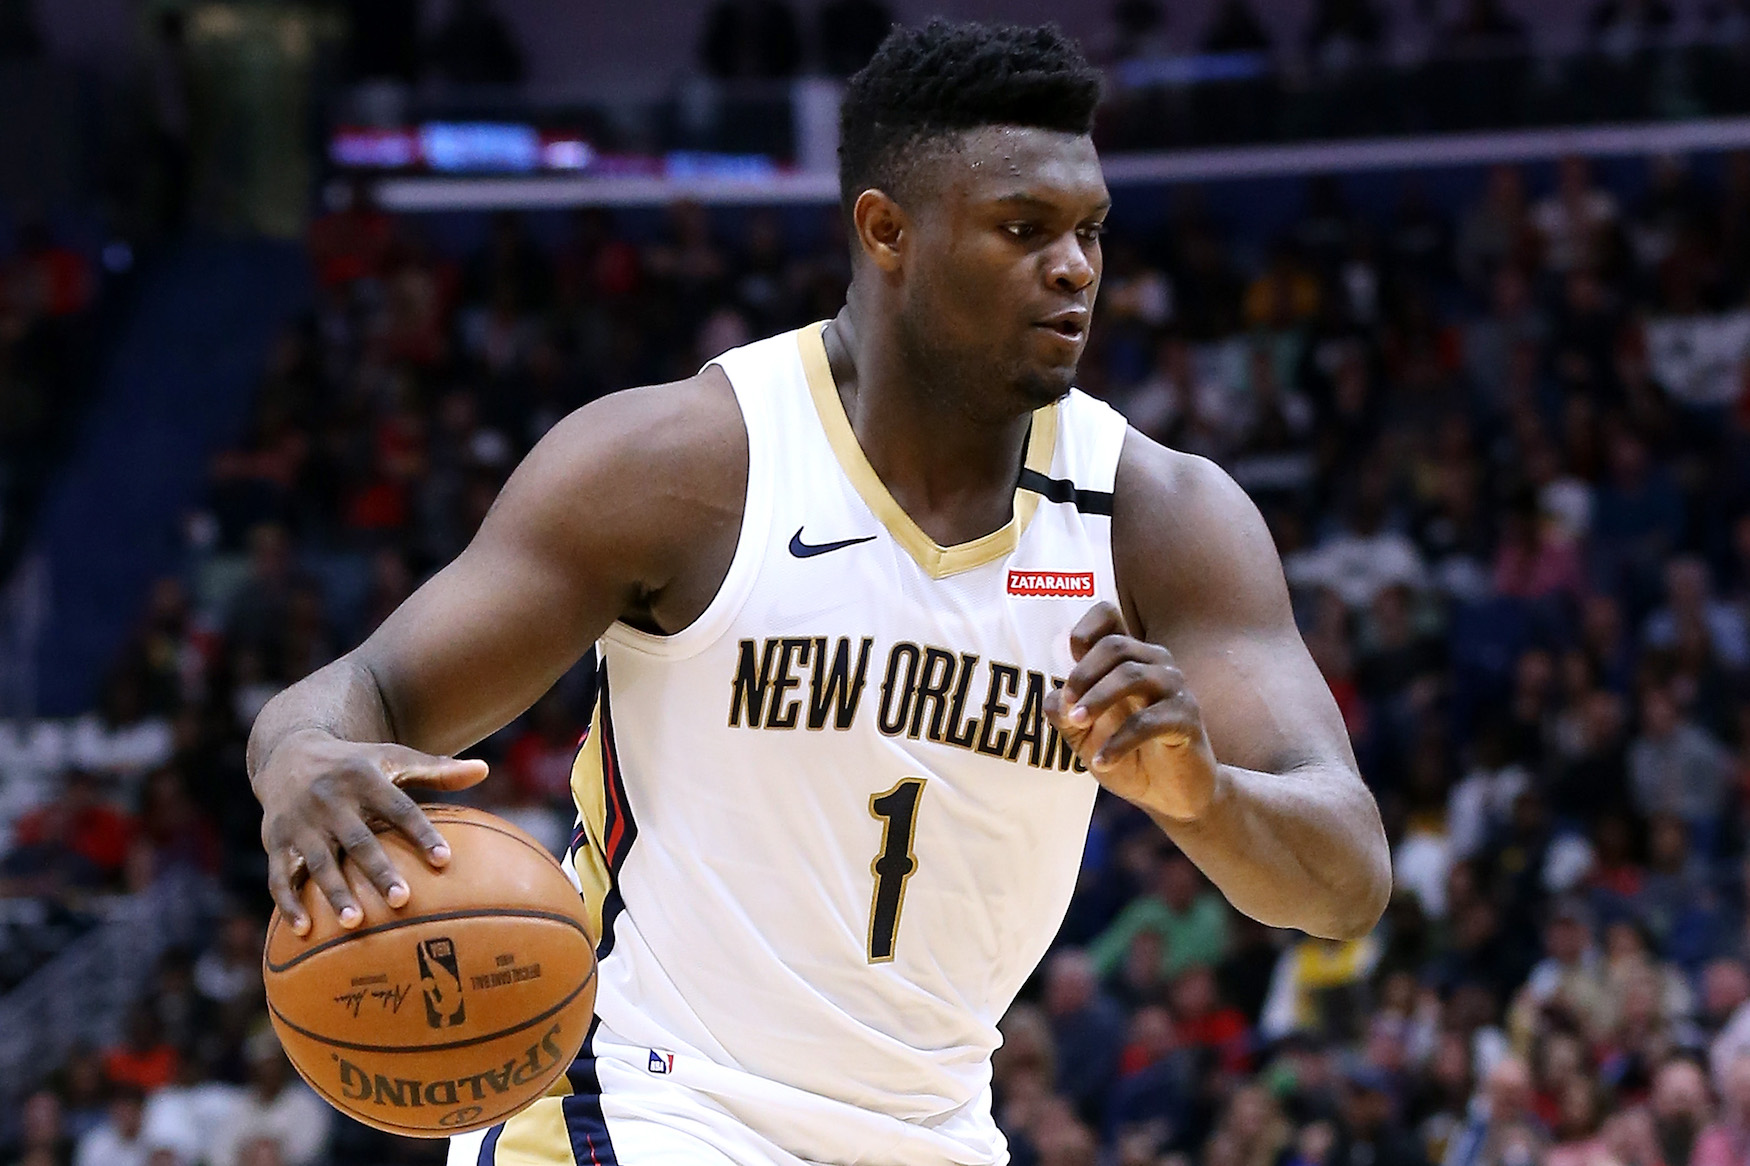 What is Zion Williamson's height, weight, and wingspan?